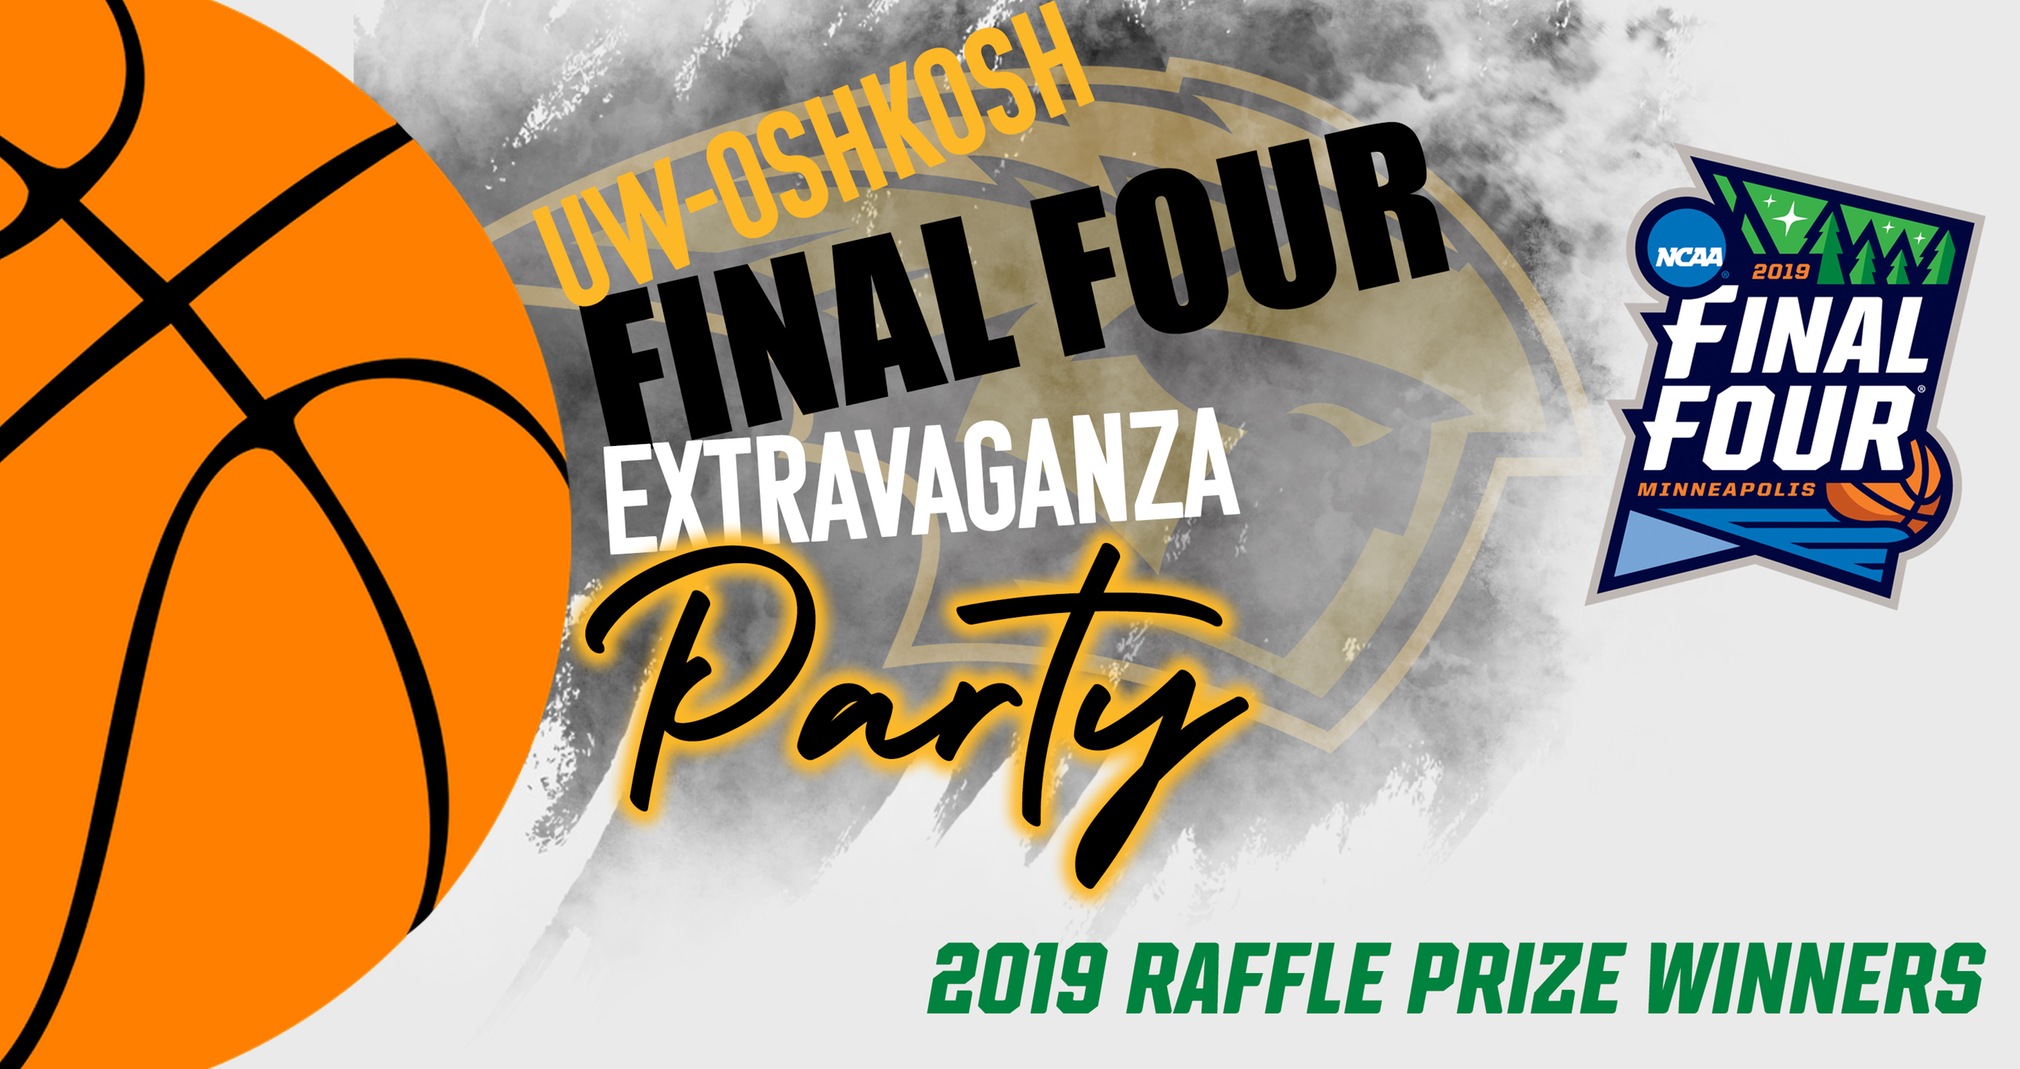 Final Four Extravaganza Party Raffle Prize Winners Announced